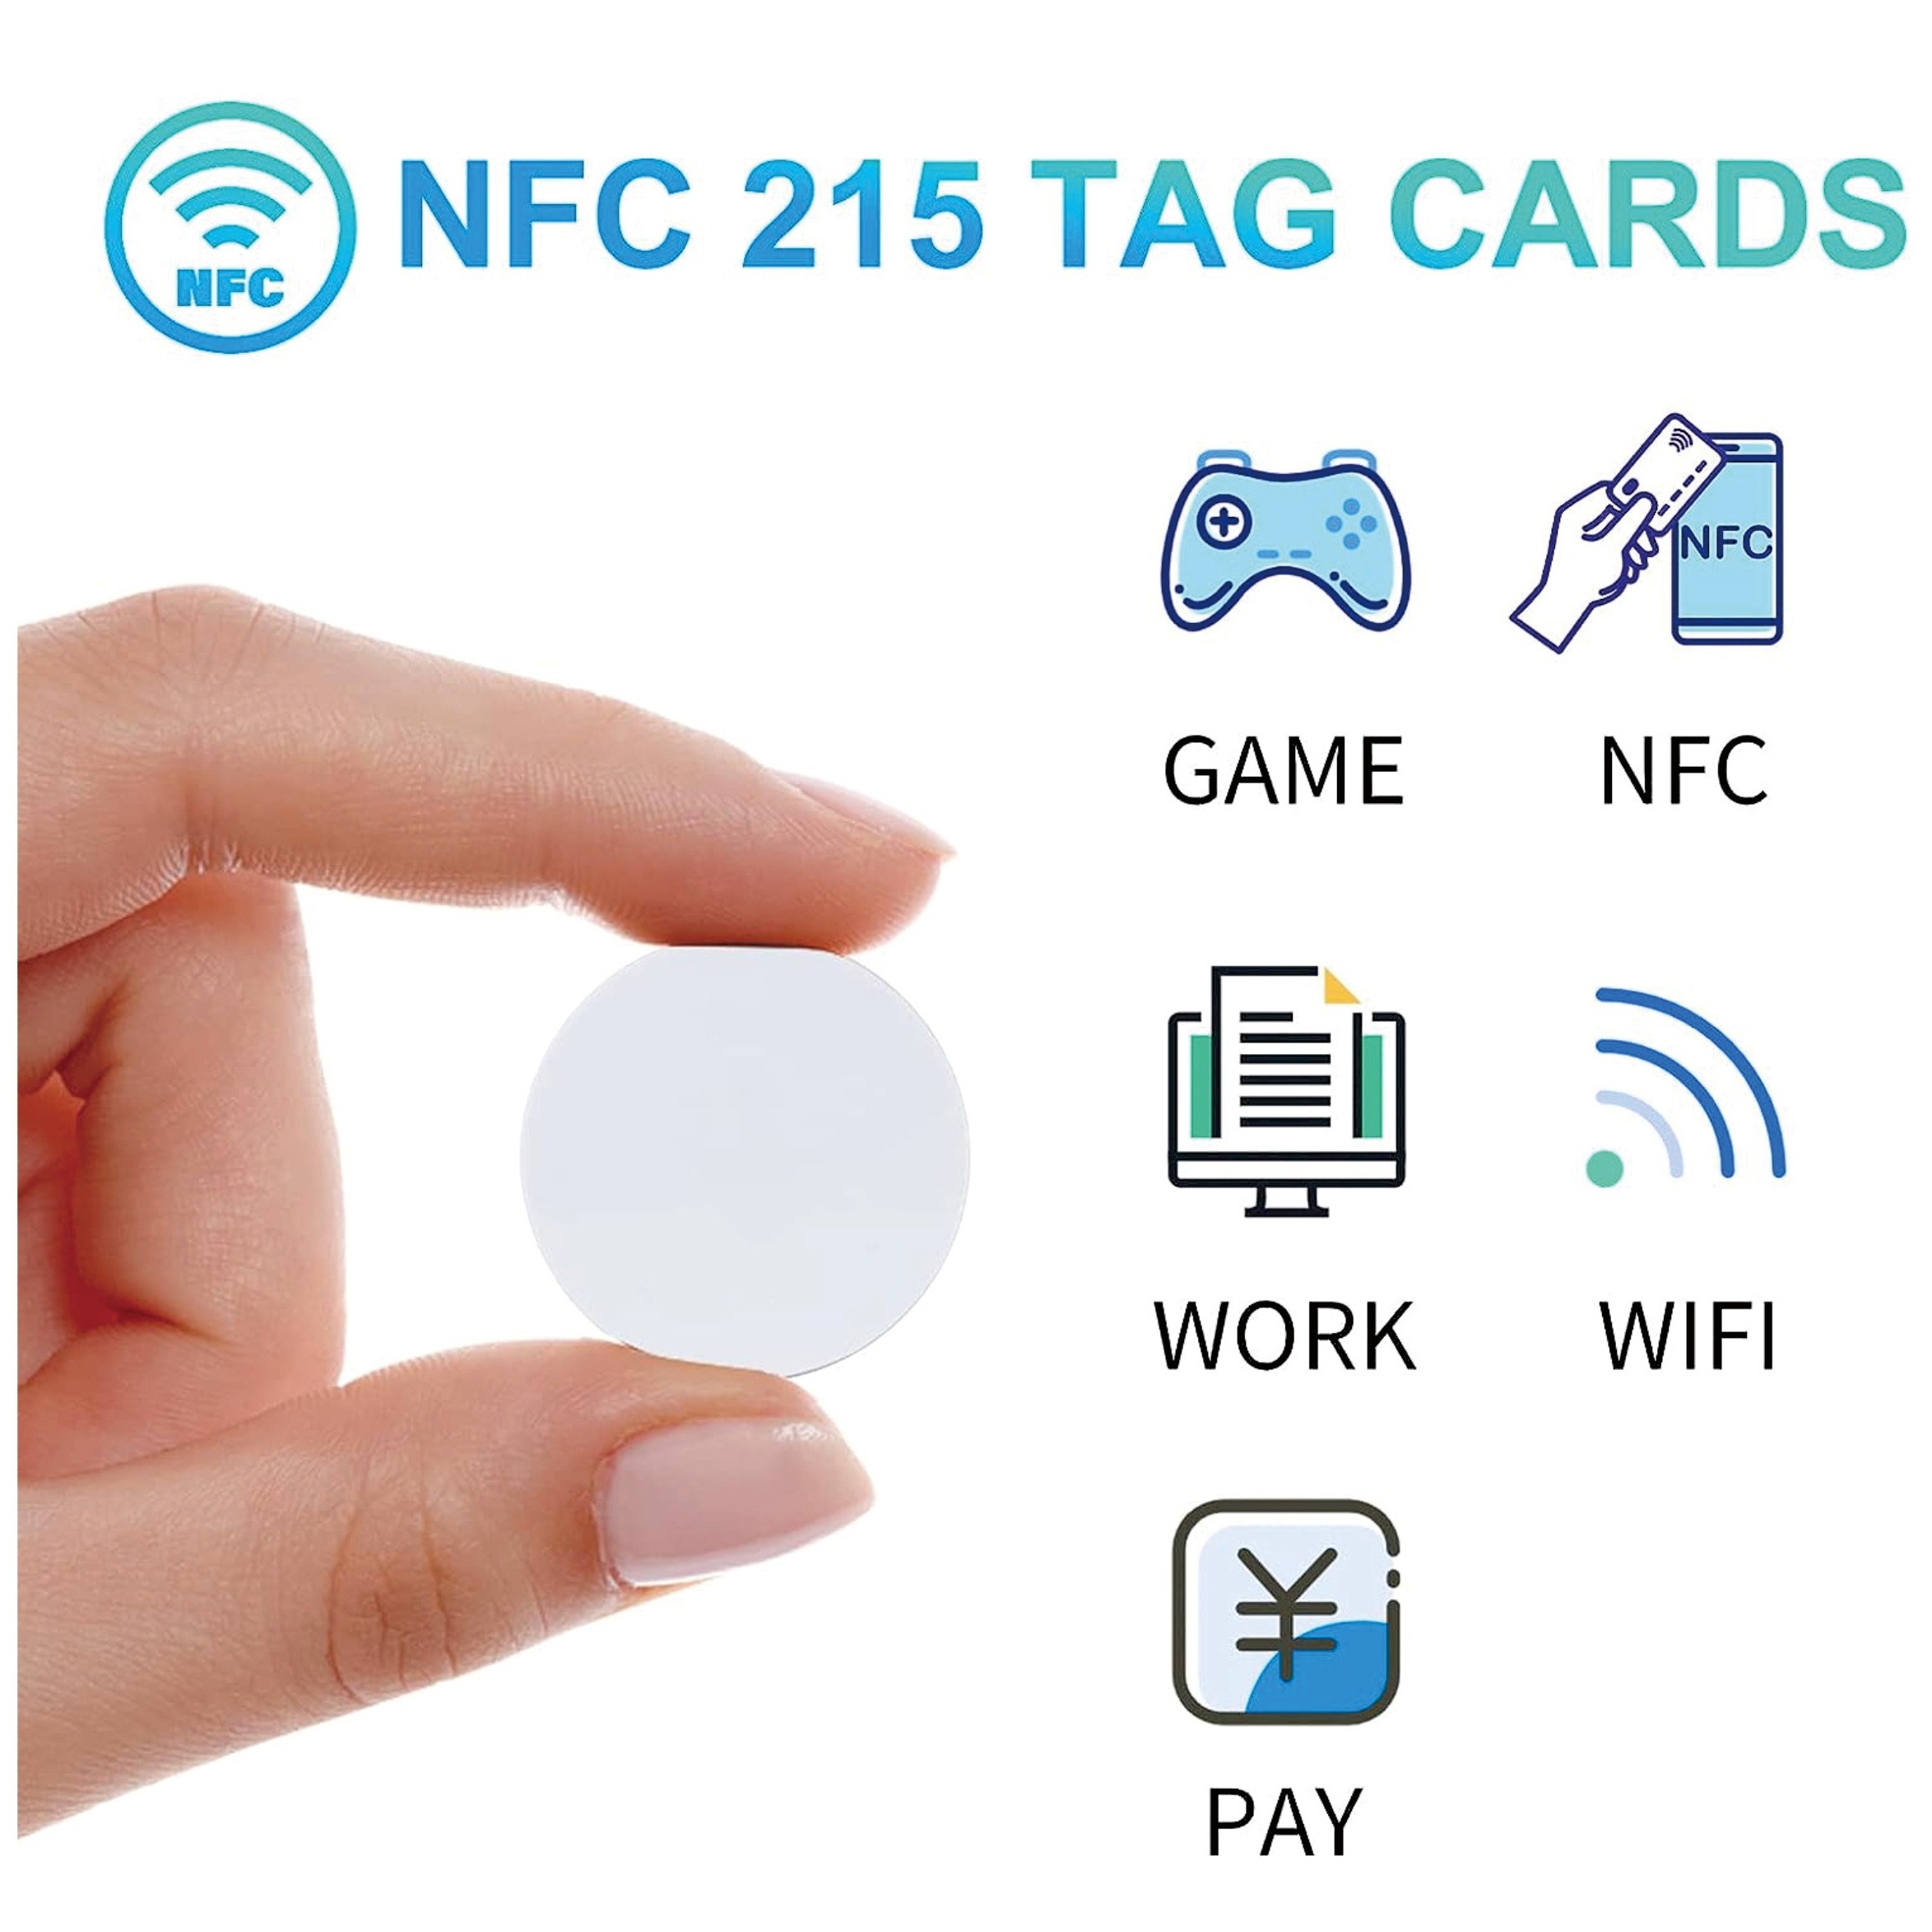 NFC Tags, NFC Cards,215 NFC Tag Rewritable 215 NFC Coin Cards Compatible  ,NFC Enabled Mobile Phones And Devices